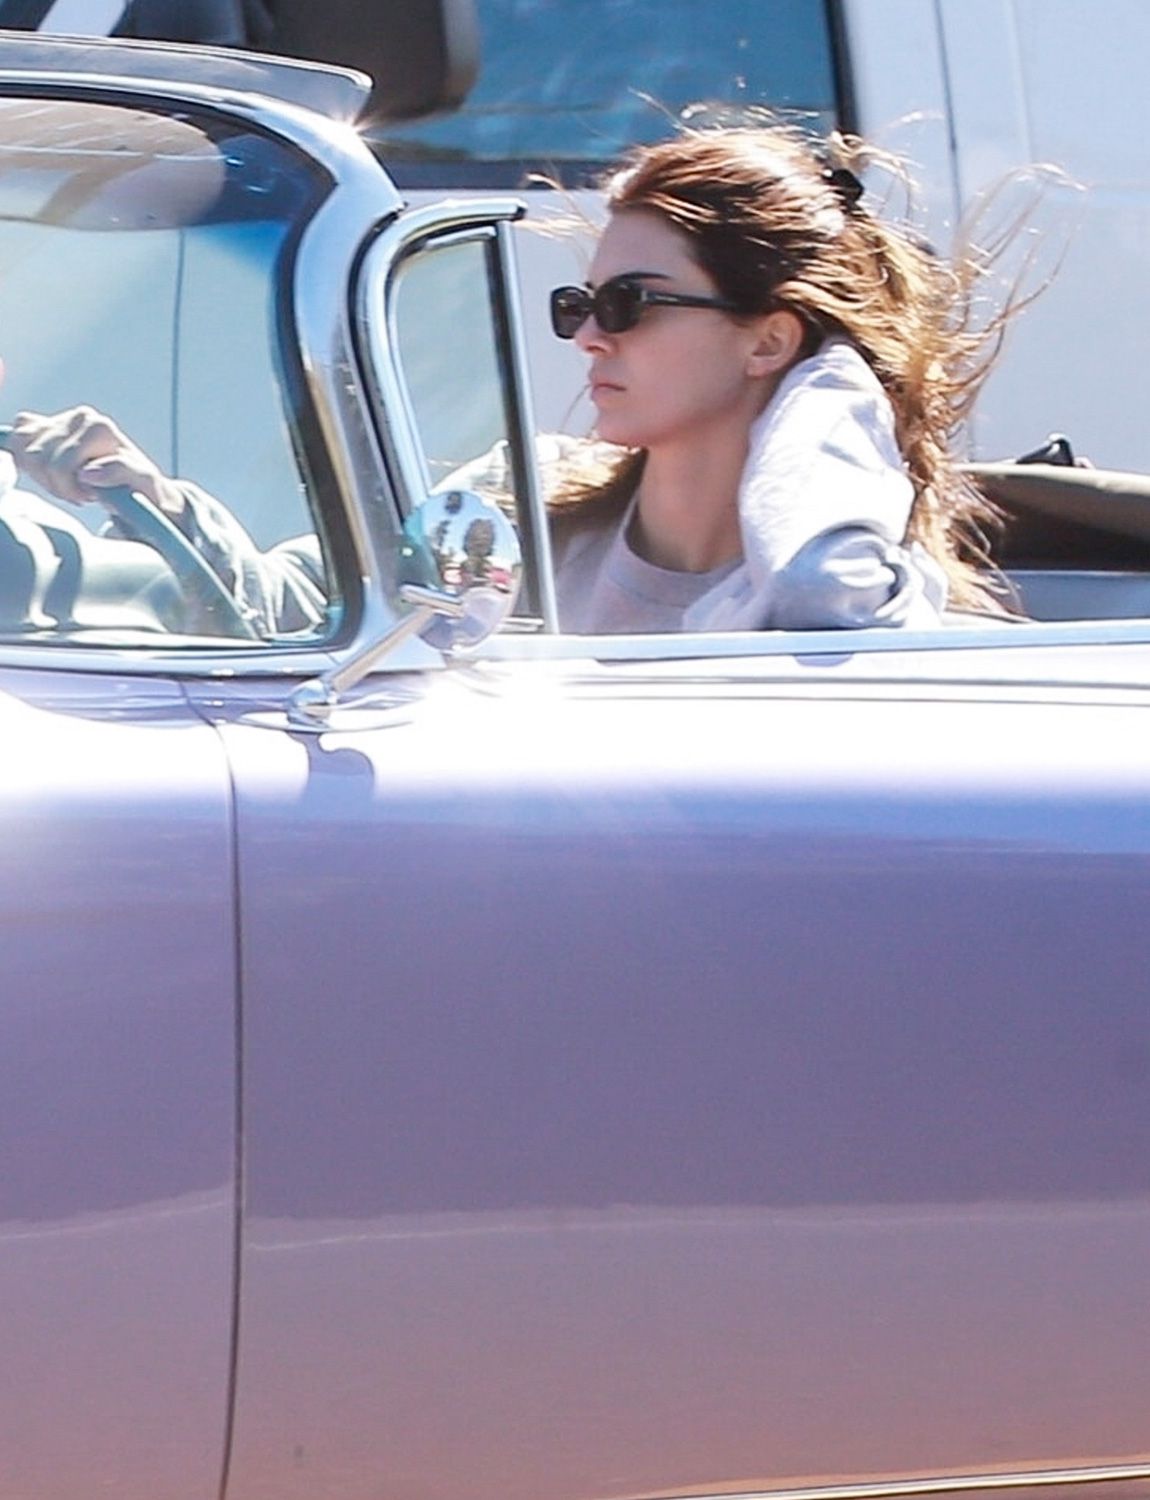 Kendall Jenner goes for a cruise in her classic convertible Cadillac amid coronavirus outbreak